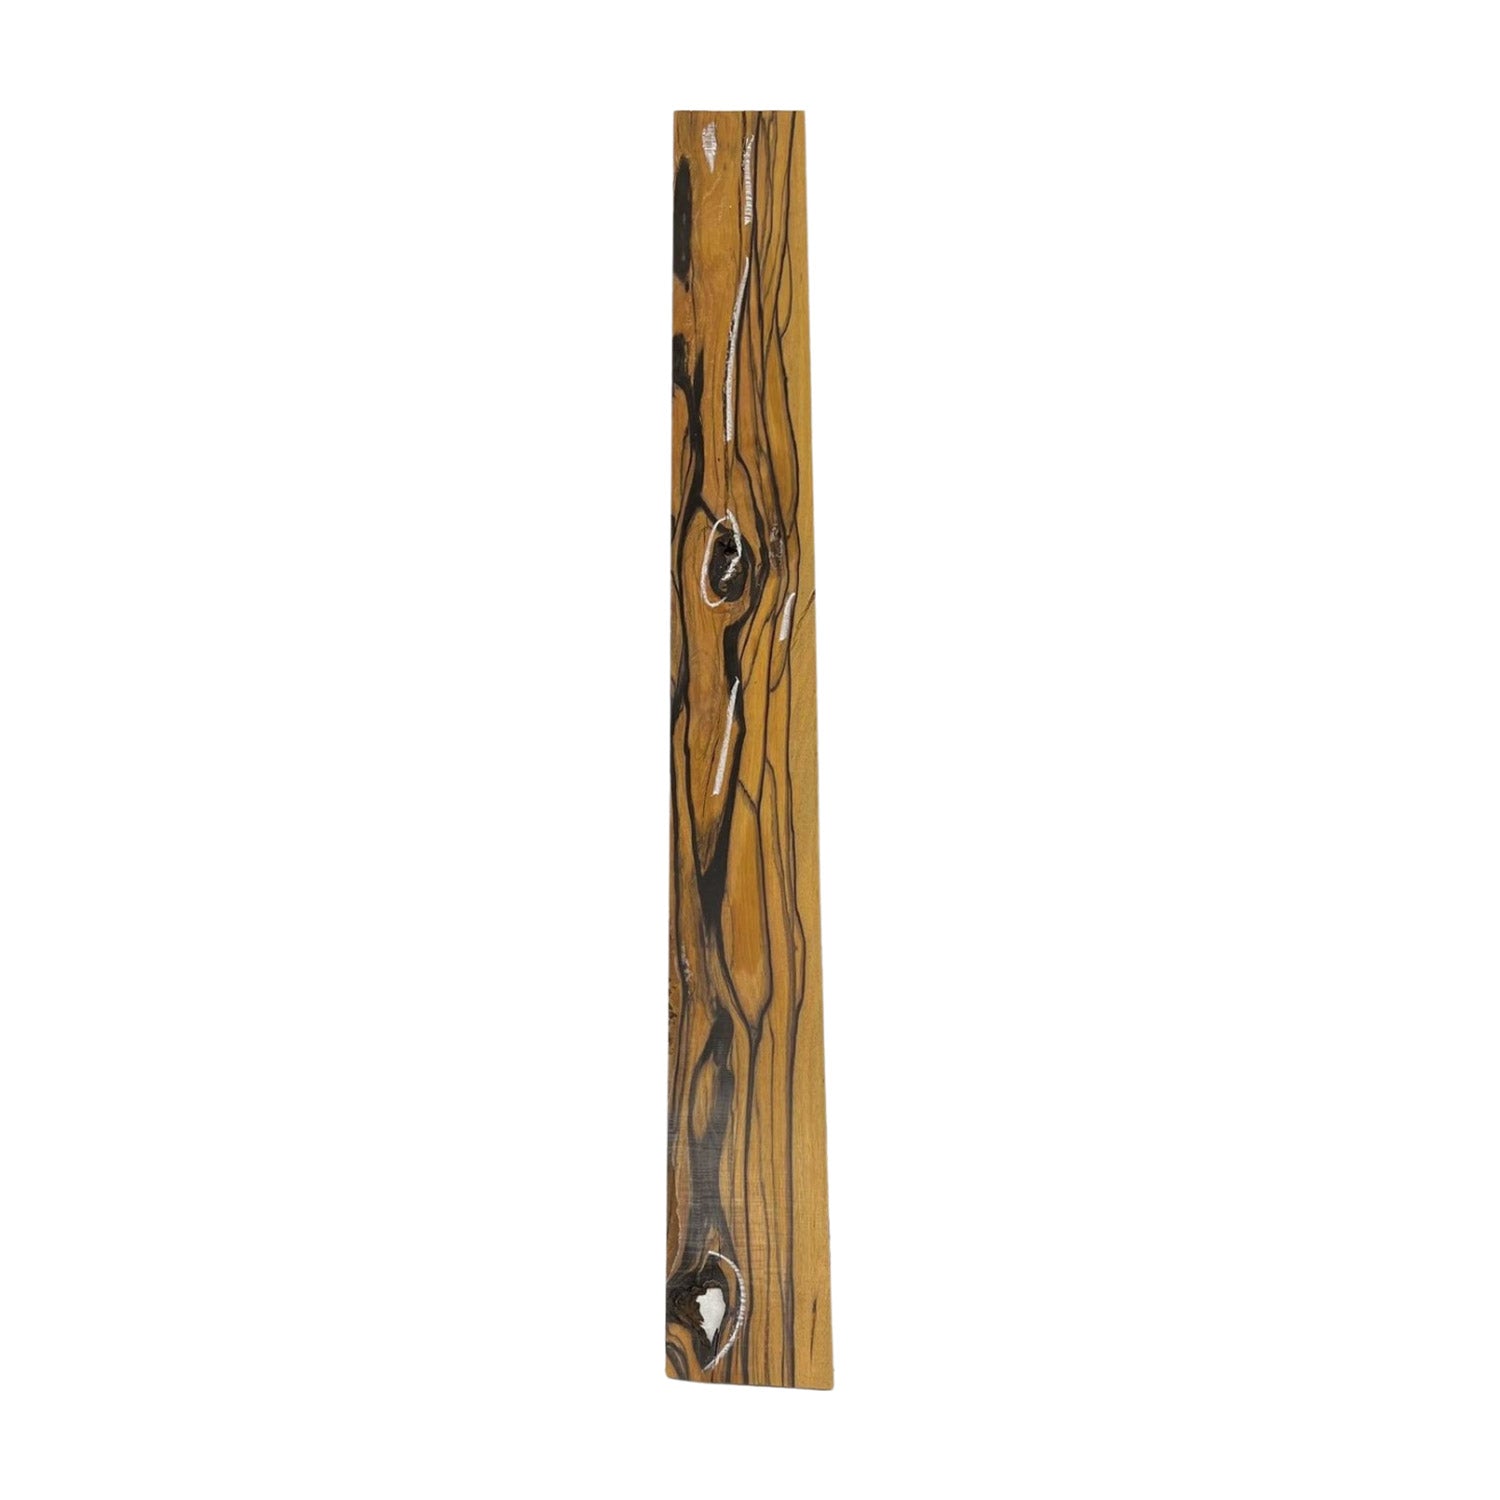 Black and White Ebony Lumber Board 40&quot;x 4-1/2&quot;x 5/8&quot; 